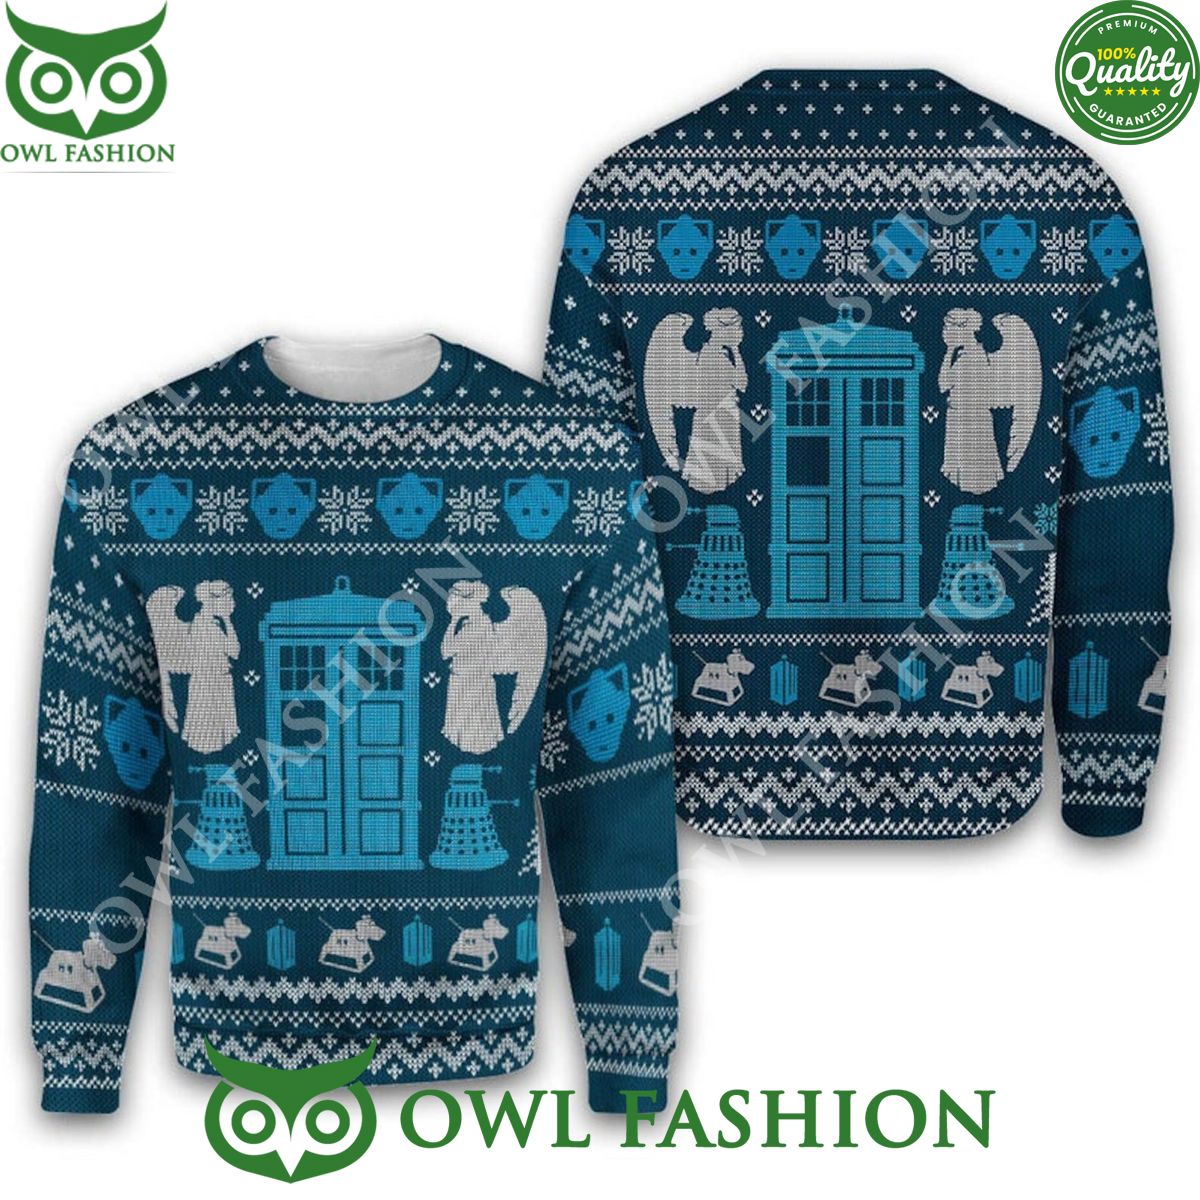 whos outside doctor who ugly christmas sweater jumper 1 A4Tz3.jpg